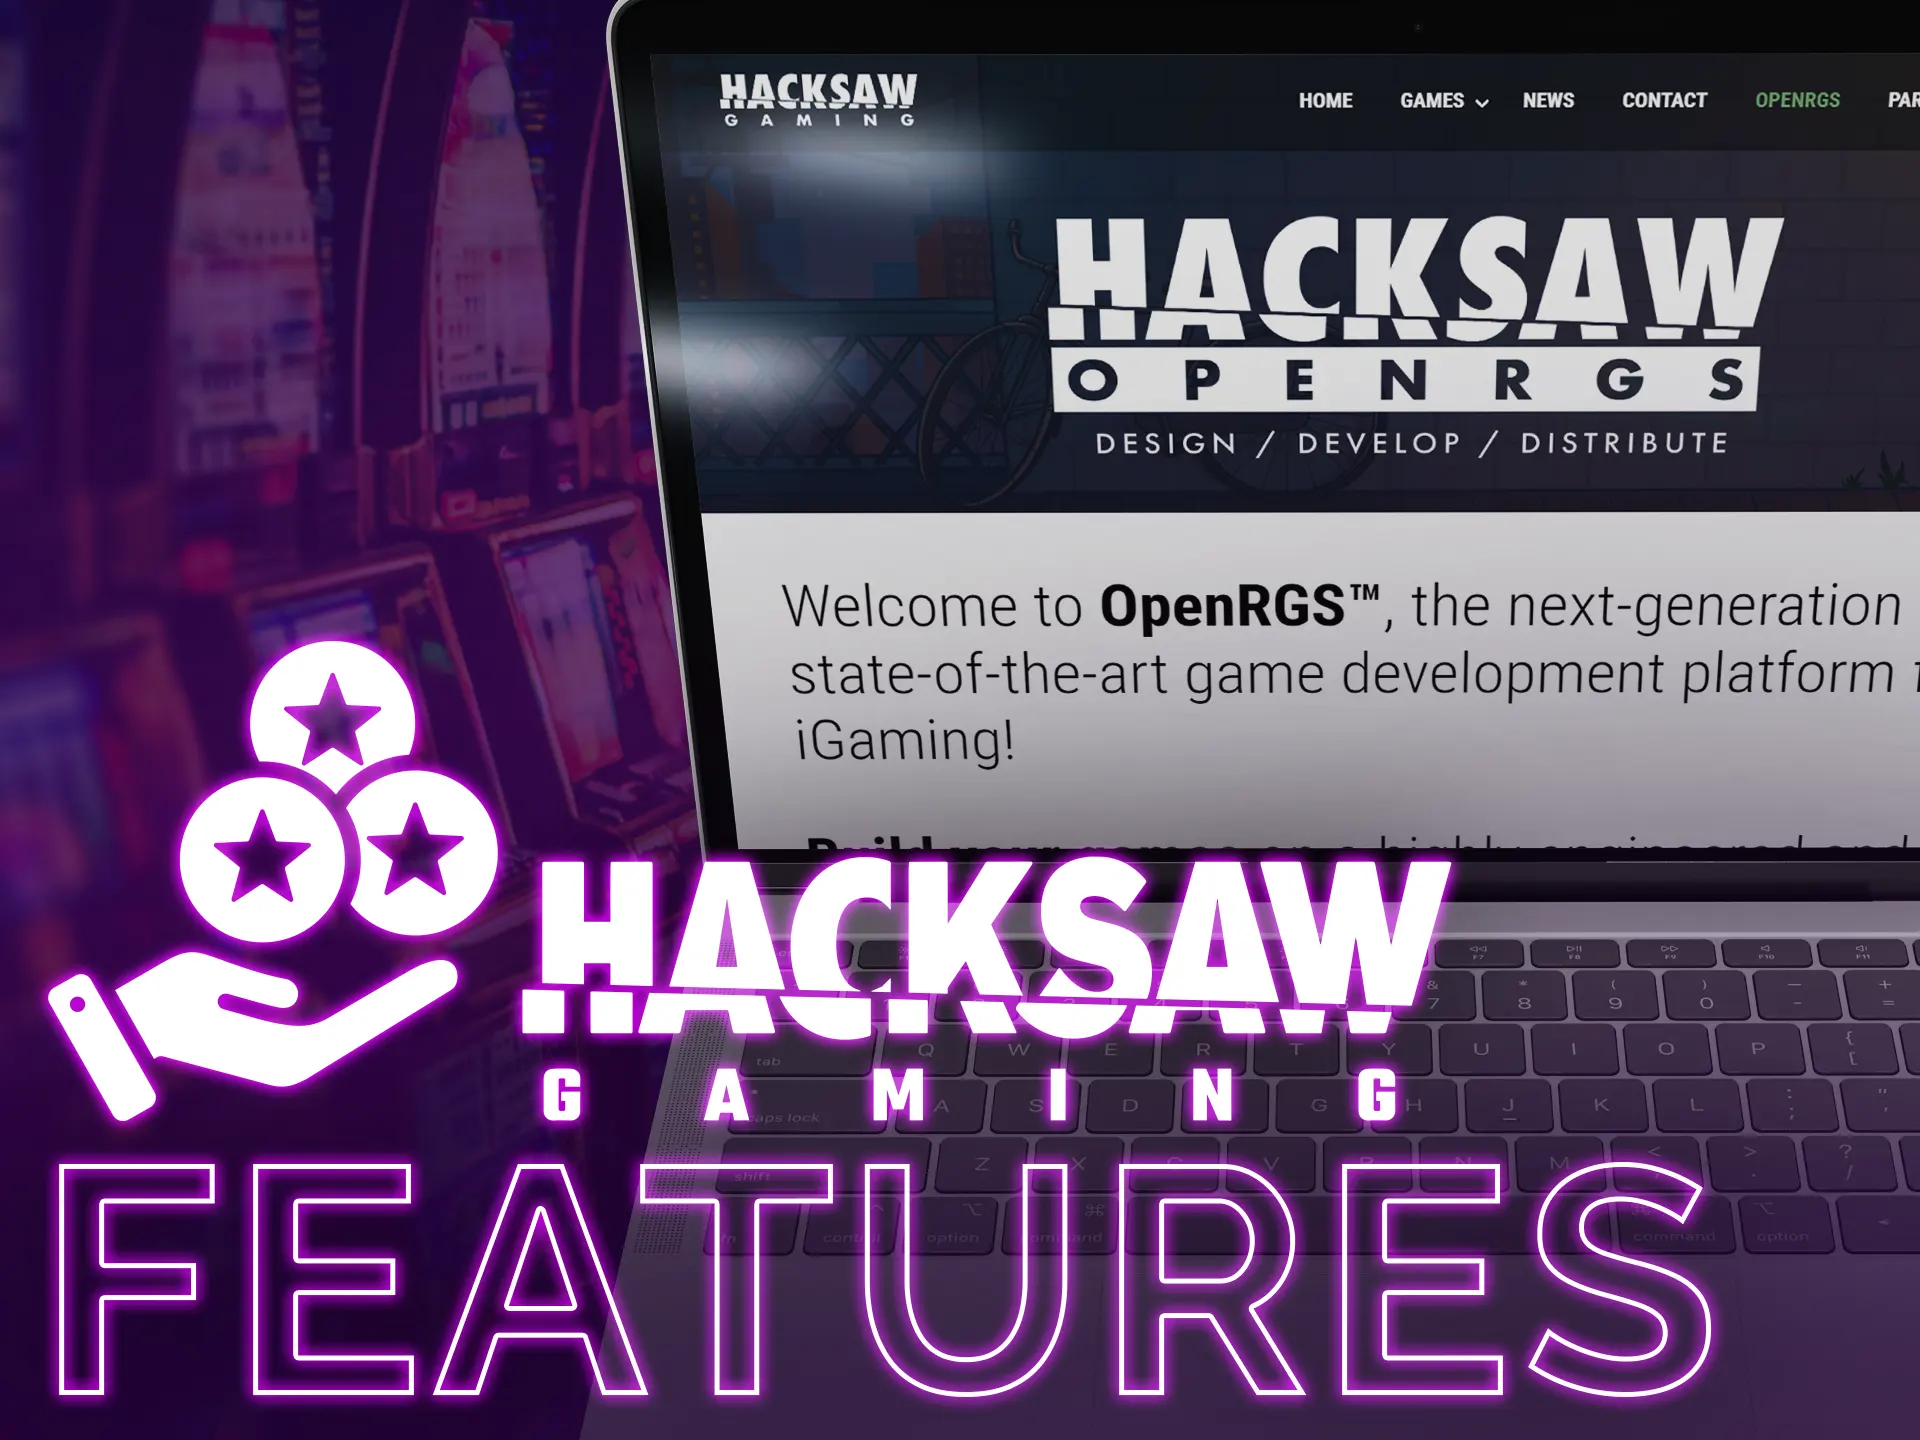 Hacksaw Gaming offers an advanced platform for innovative iGaming.